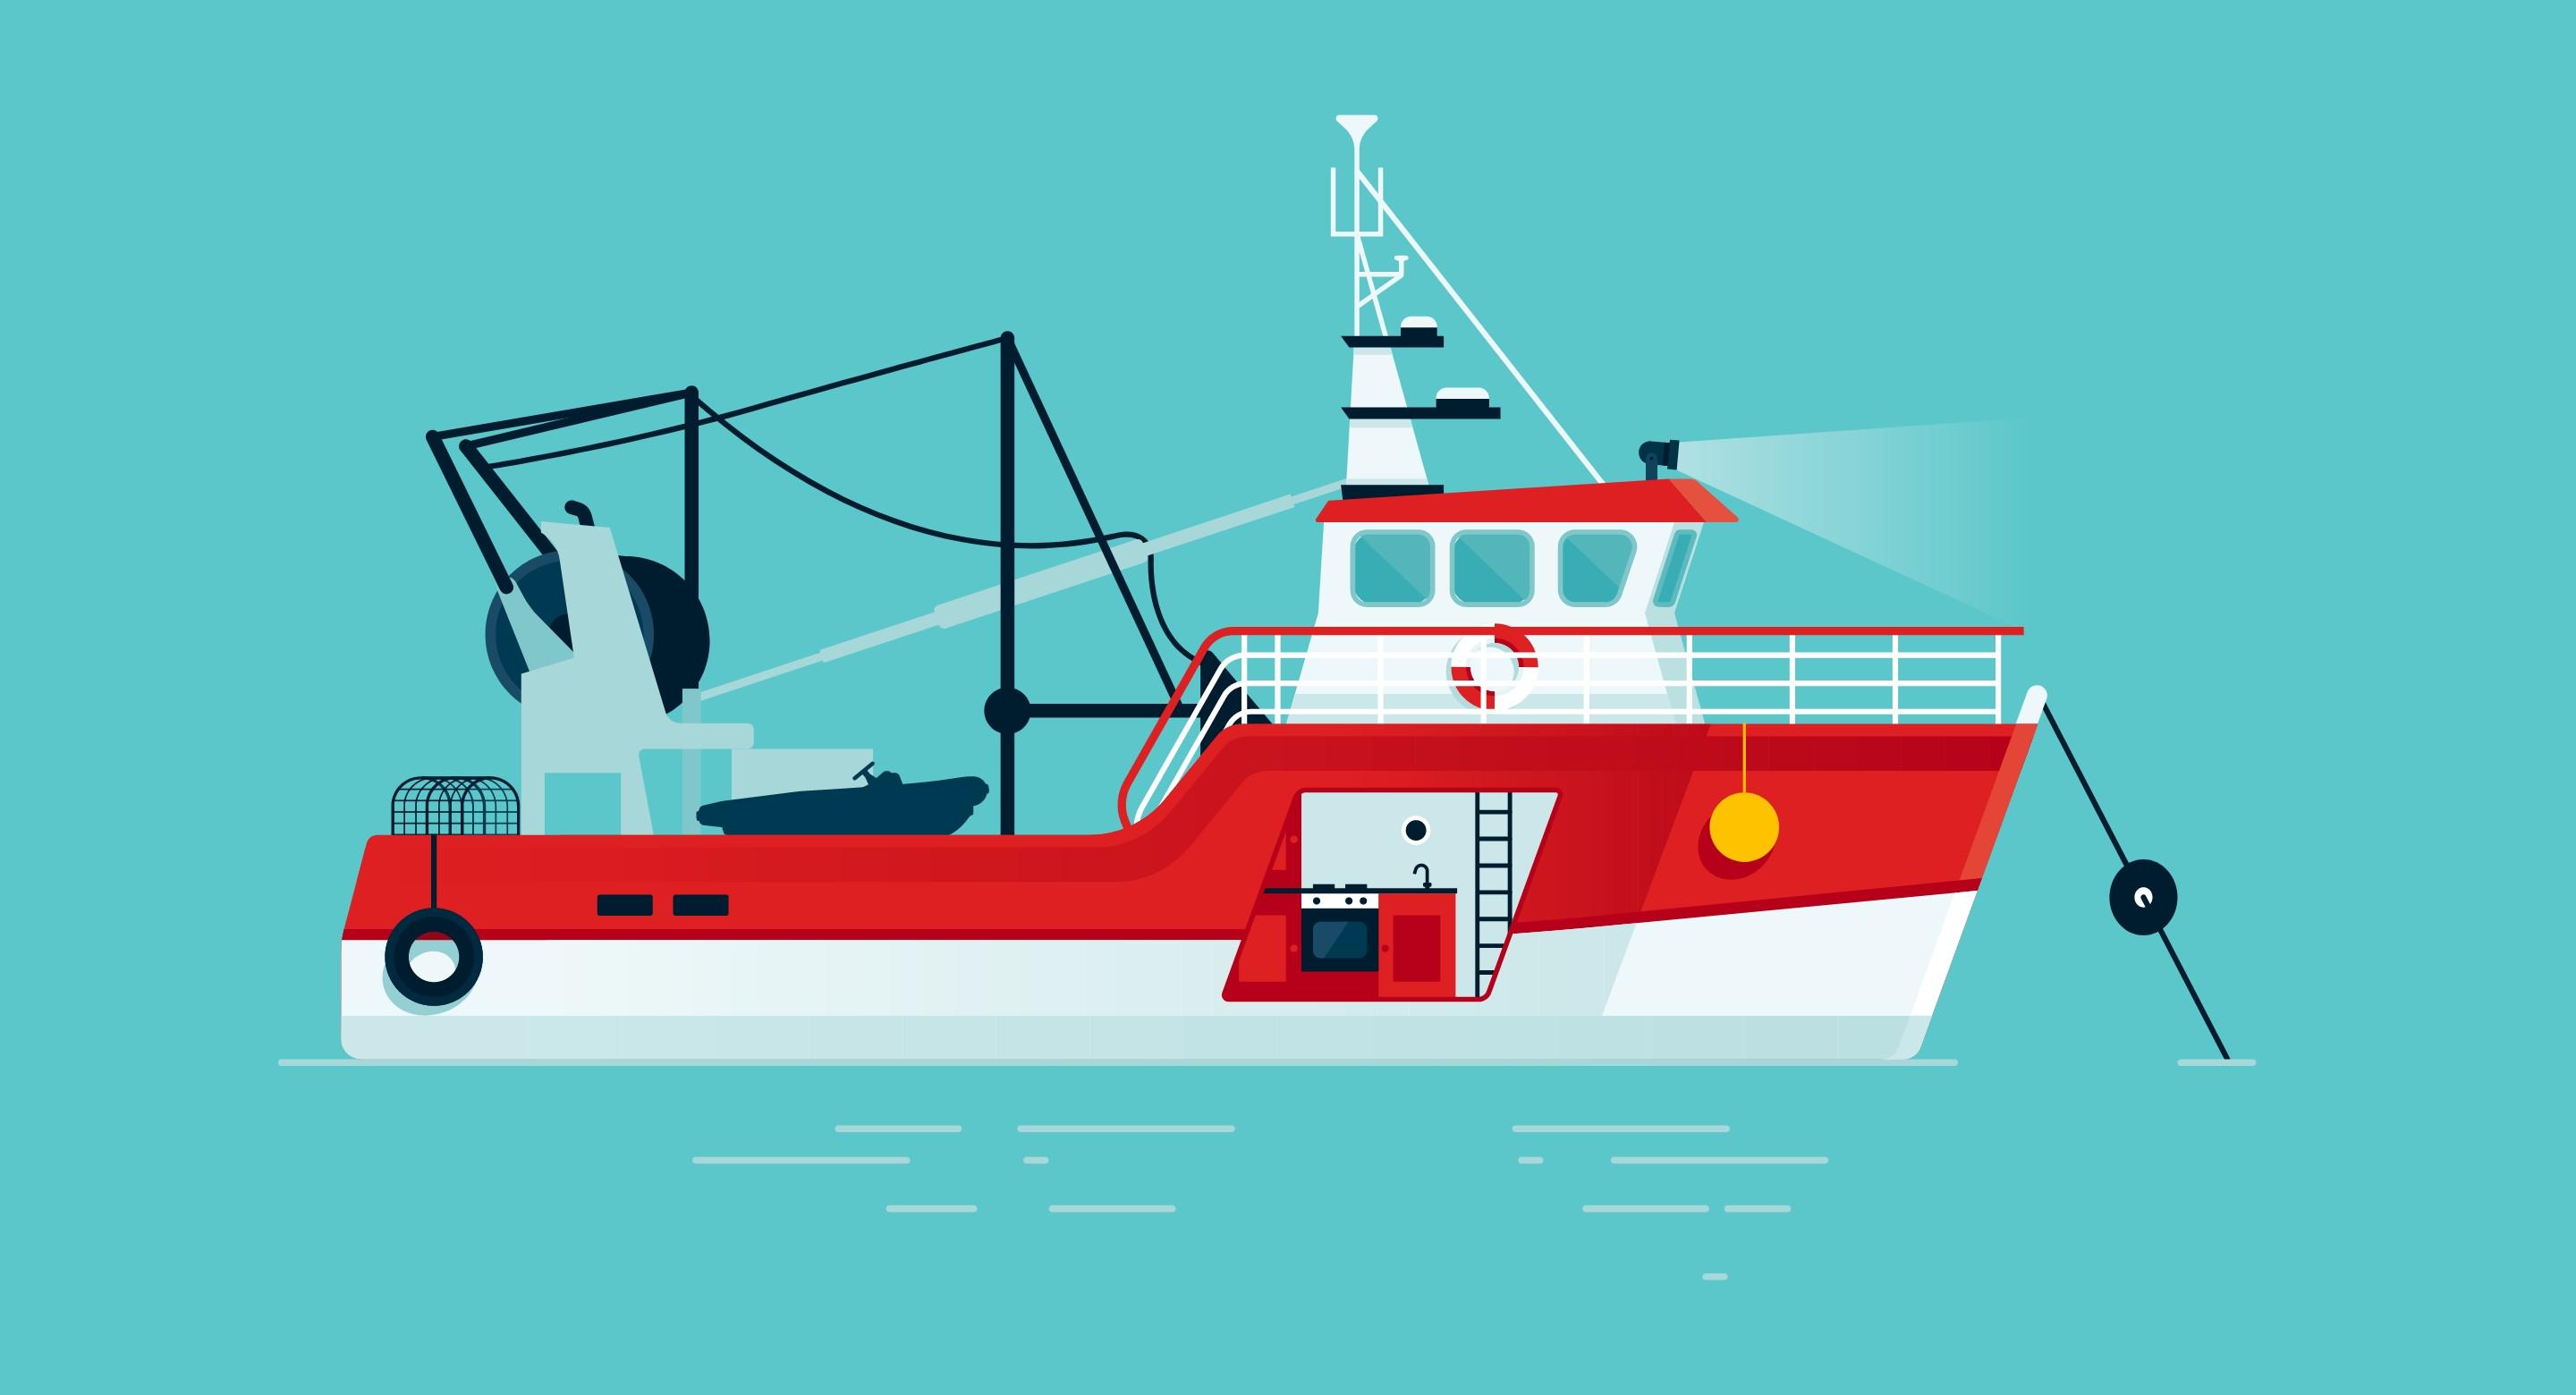 Boat illustration by Root Studio